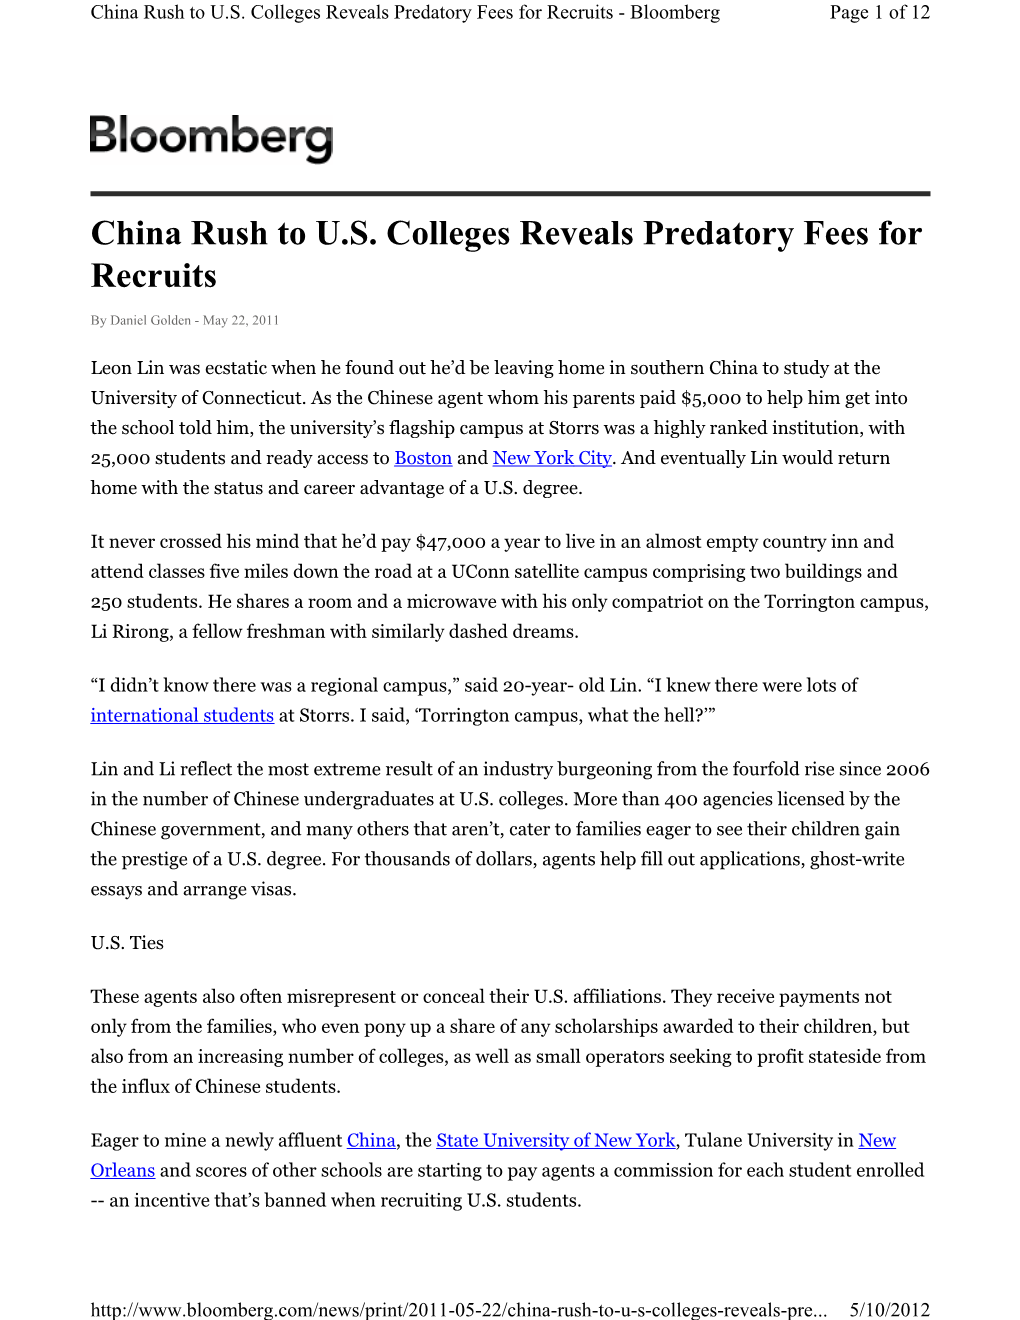 China Rush to U.S. Colleges Reveals Predatory Fees for Recruits - Bloomberg Page 1 of 12